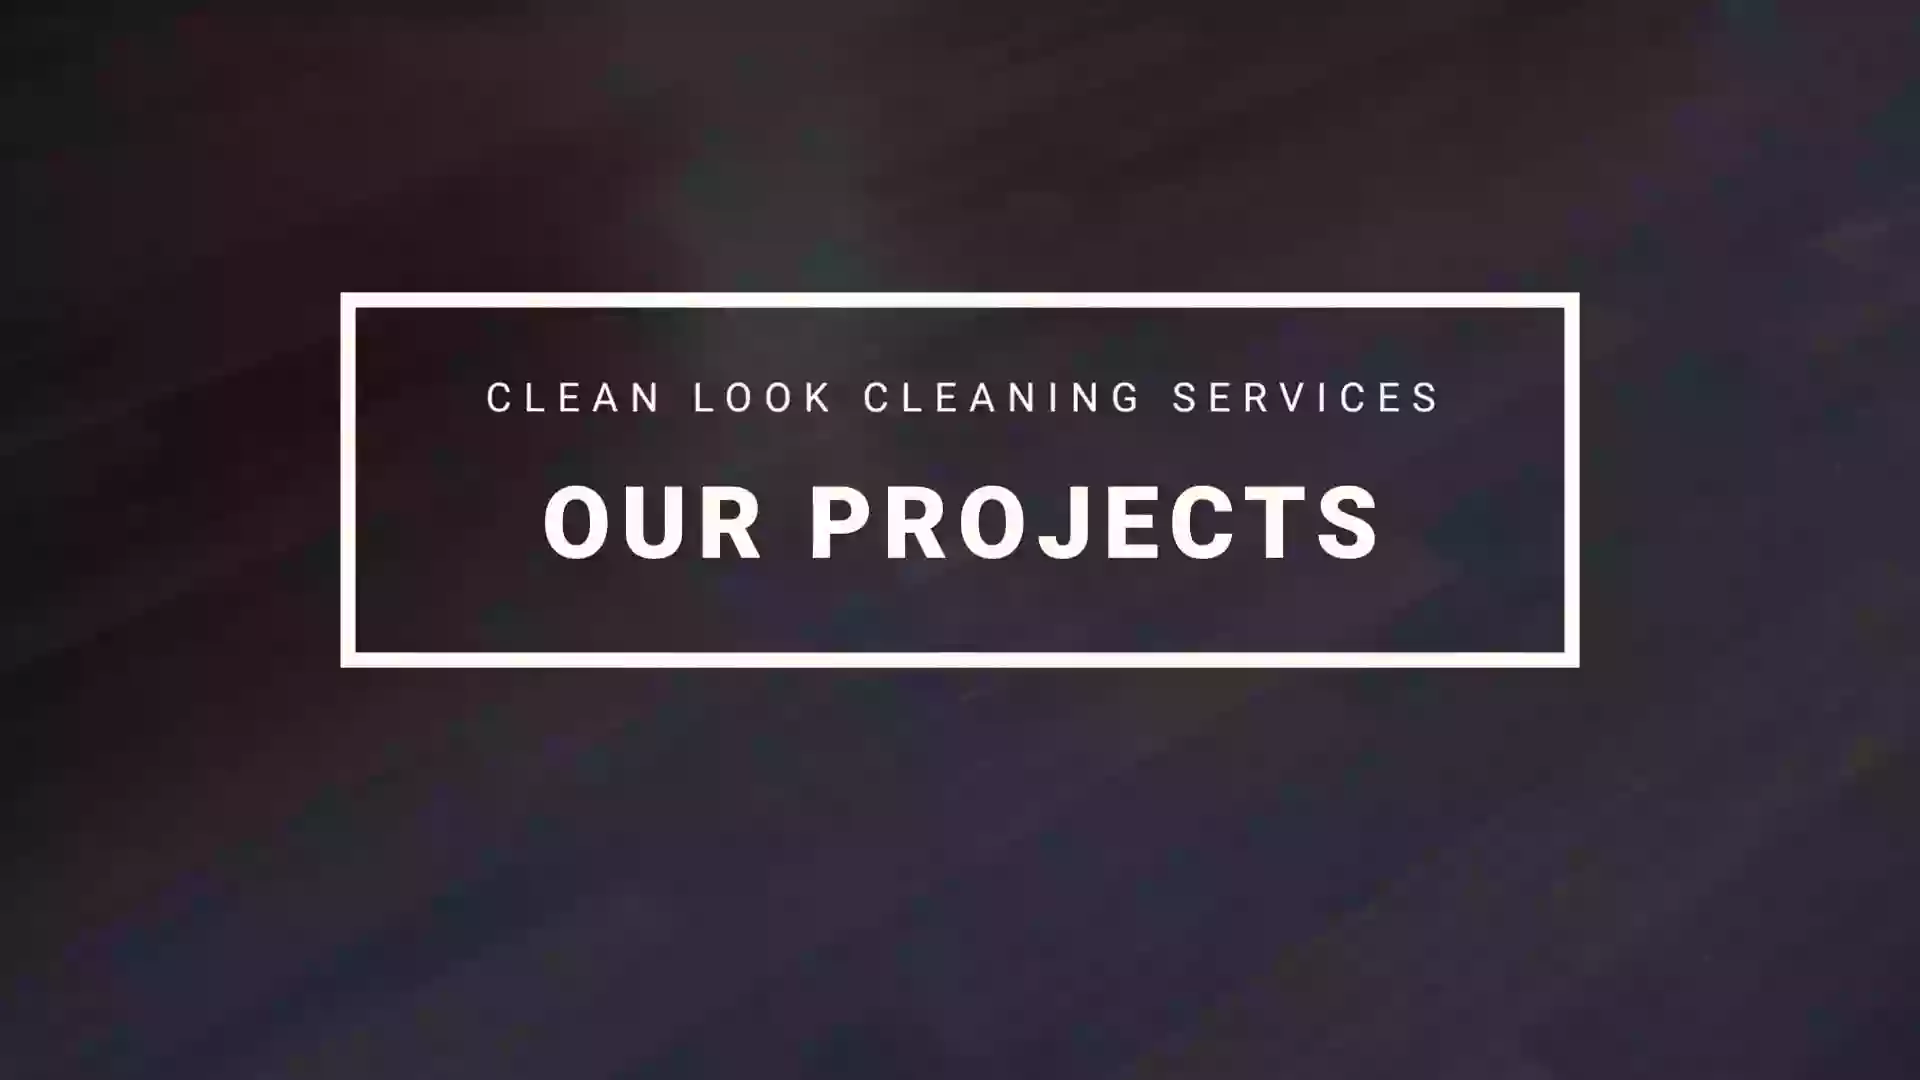 Clean Look Cleaning Services